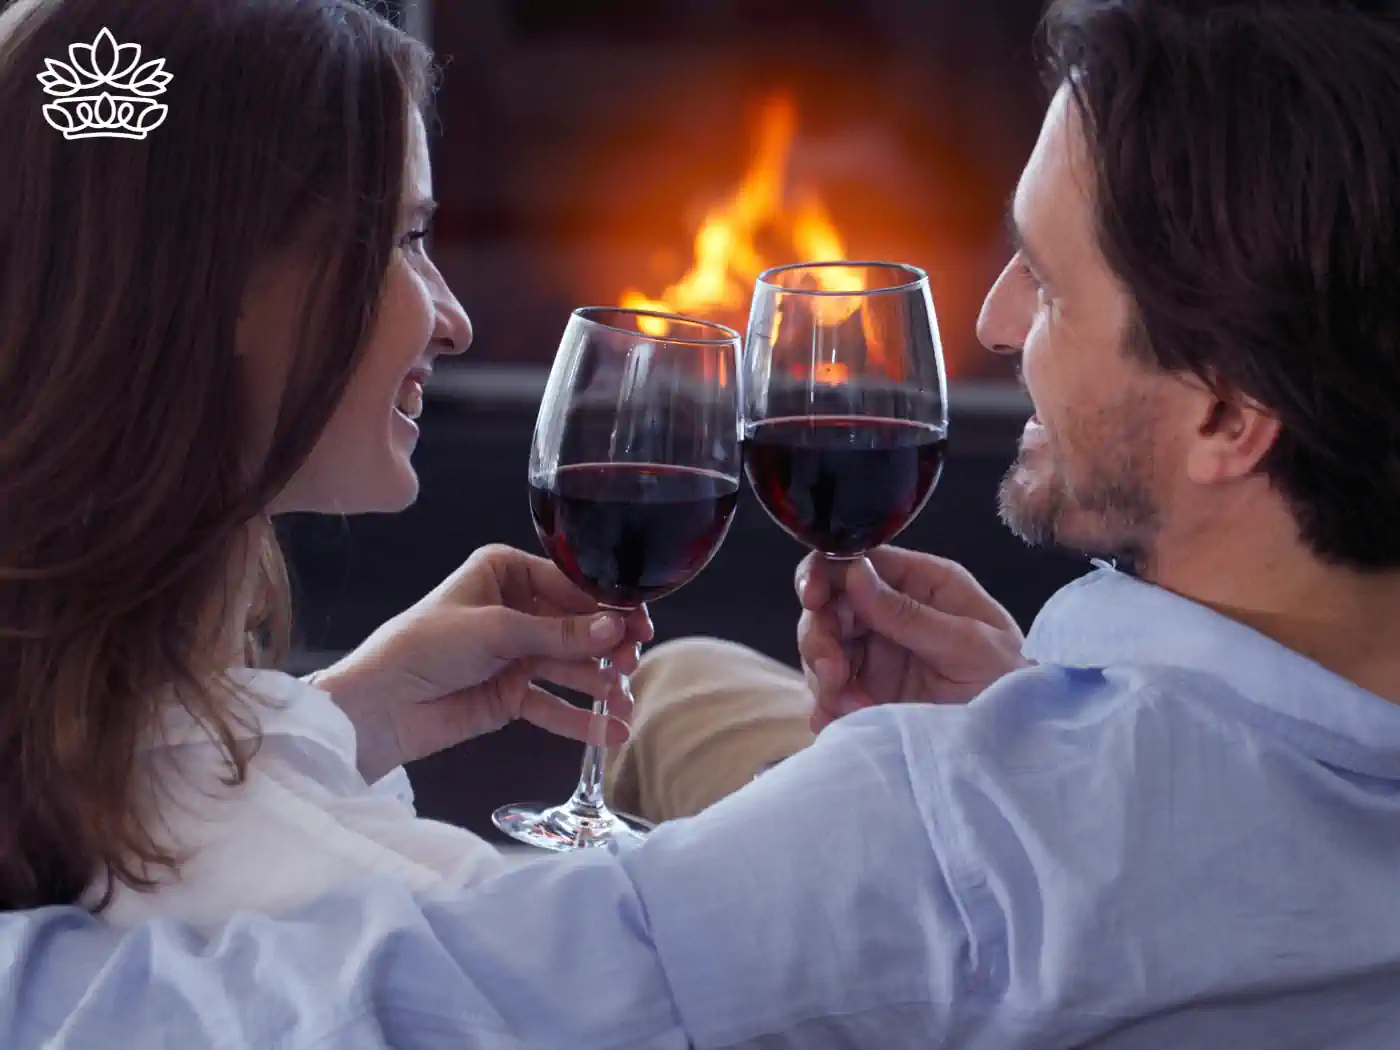 A couple enjoying a romantic evening with red wine in front of a fireplace. Fabulous Flowers and Gifts - Fabulous Living Collection.